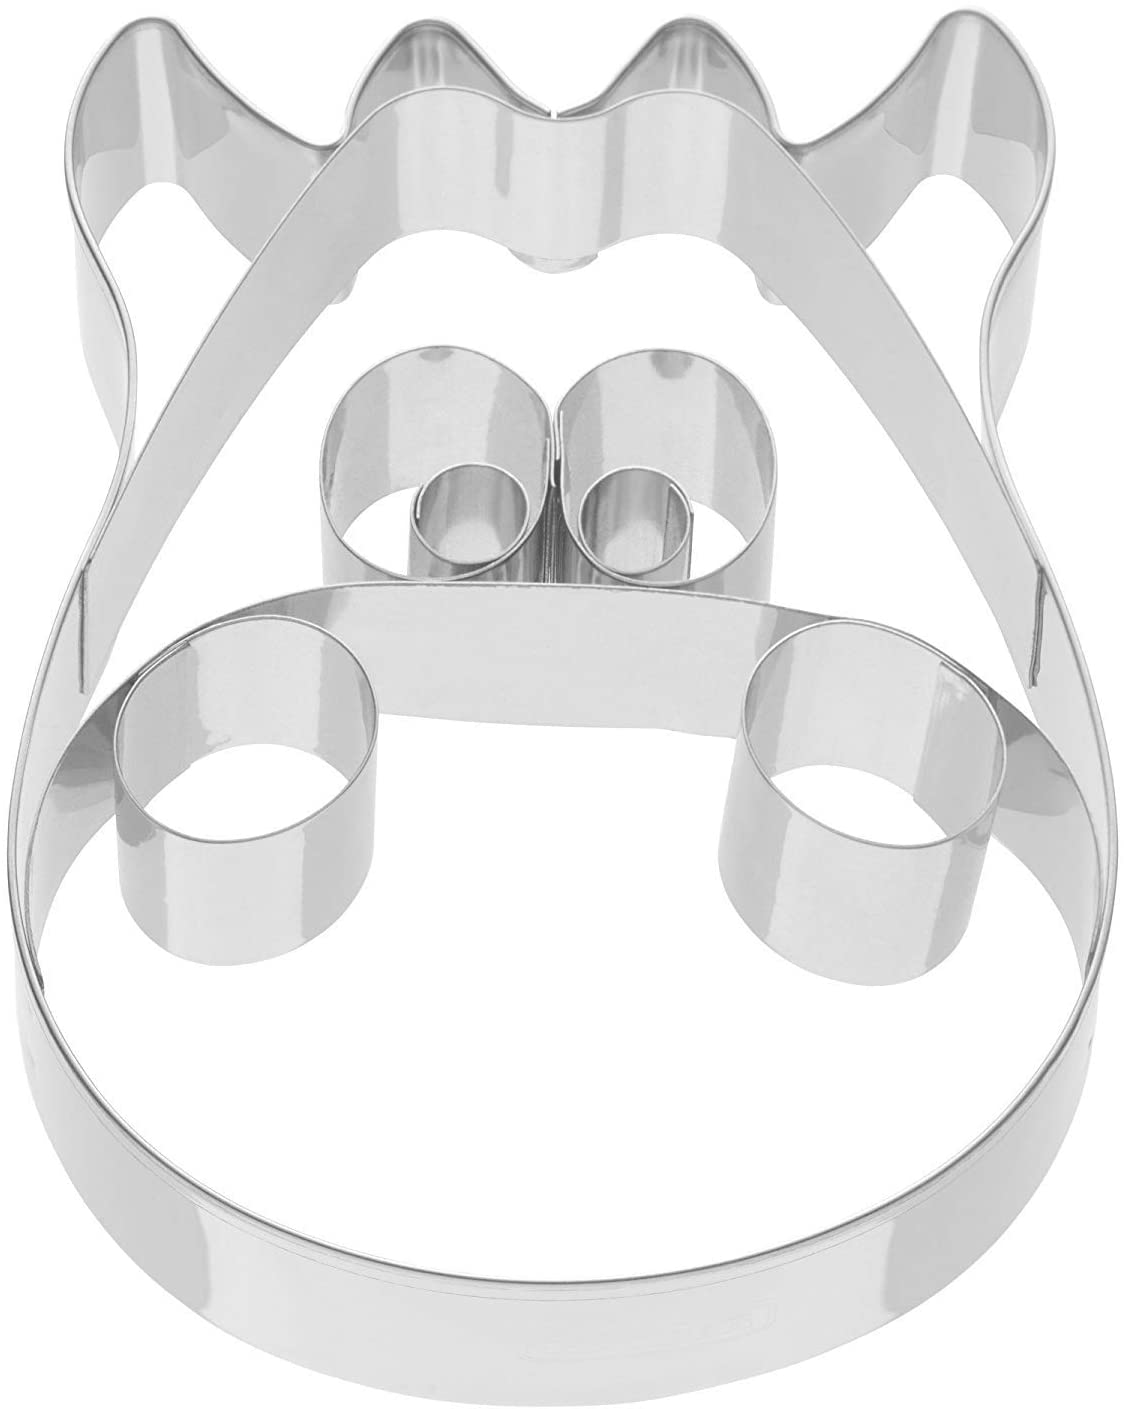 Kaiser Cookie Cutter Cow, Zoo, Stainless Steel, Cookie Cutter for Biscuits, 10 x 8 x 2.5 cm